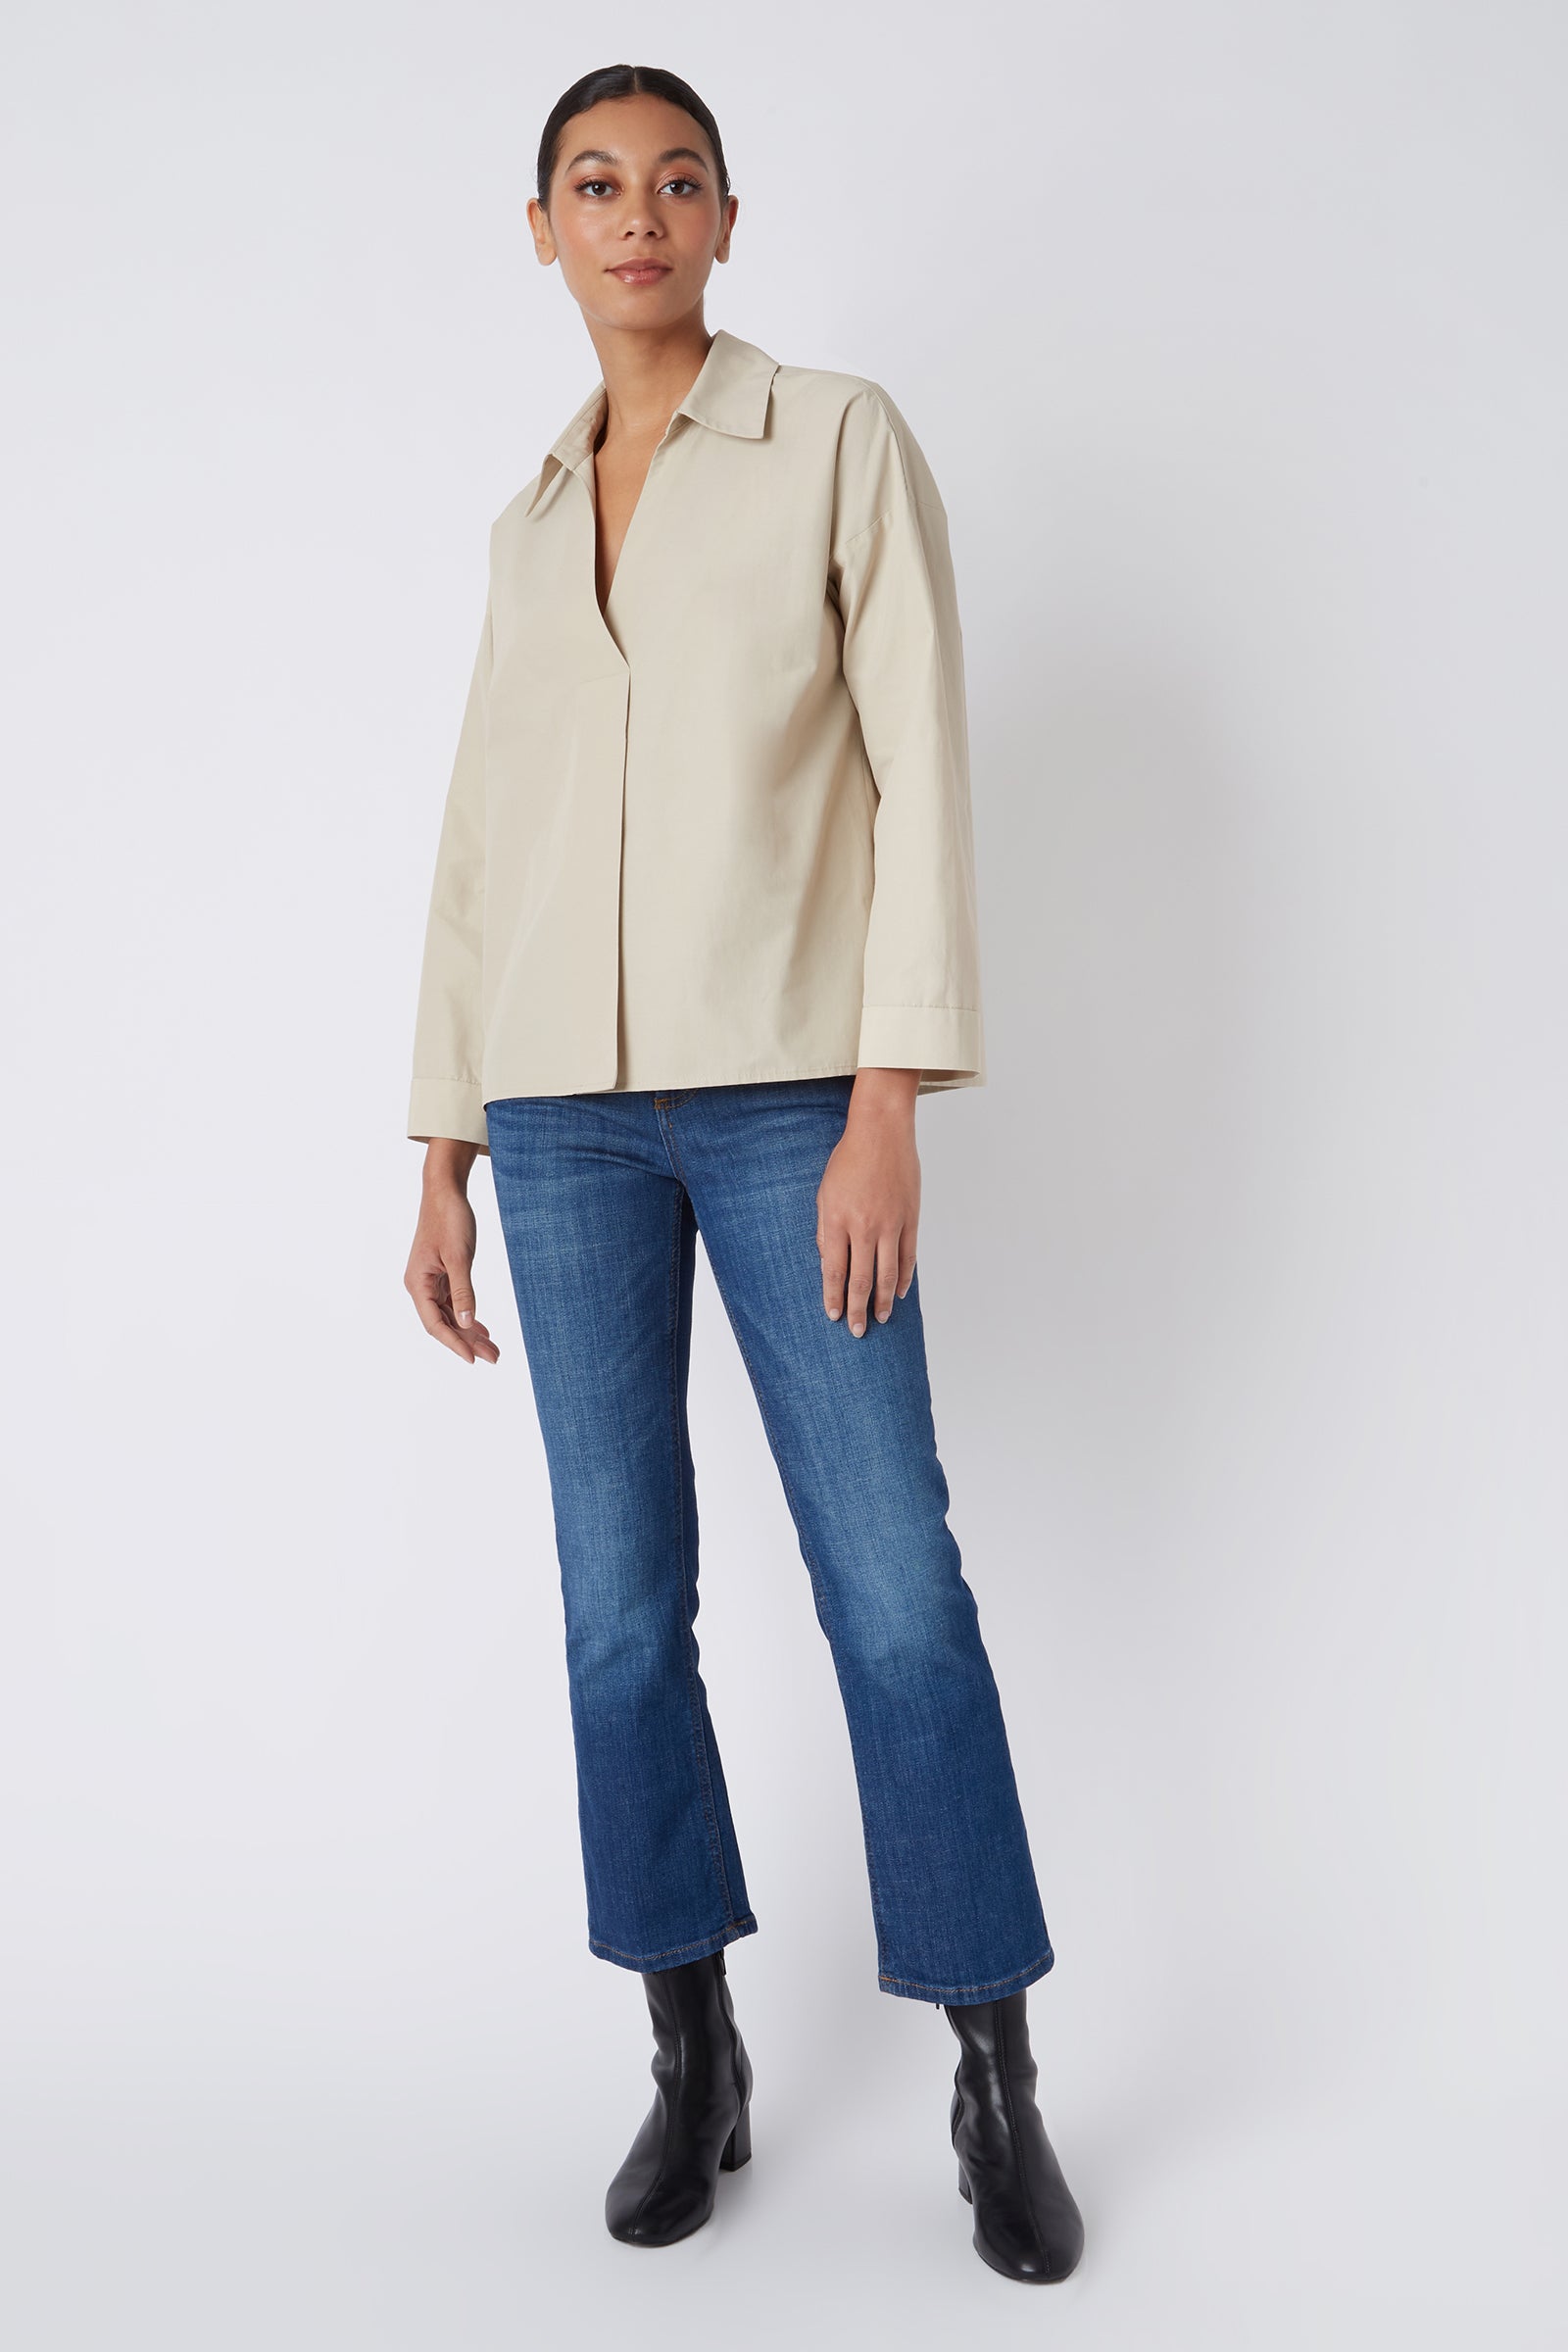 Kal Rieman Emma Collared Kimono Top in Khaki on Model Looking Straight Full Front View